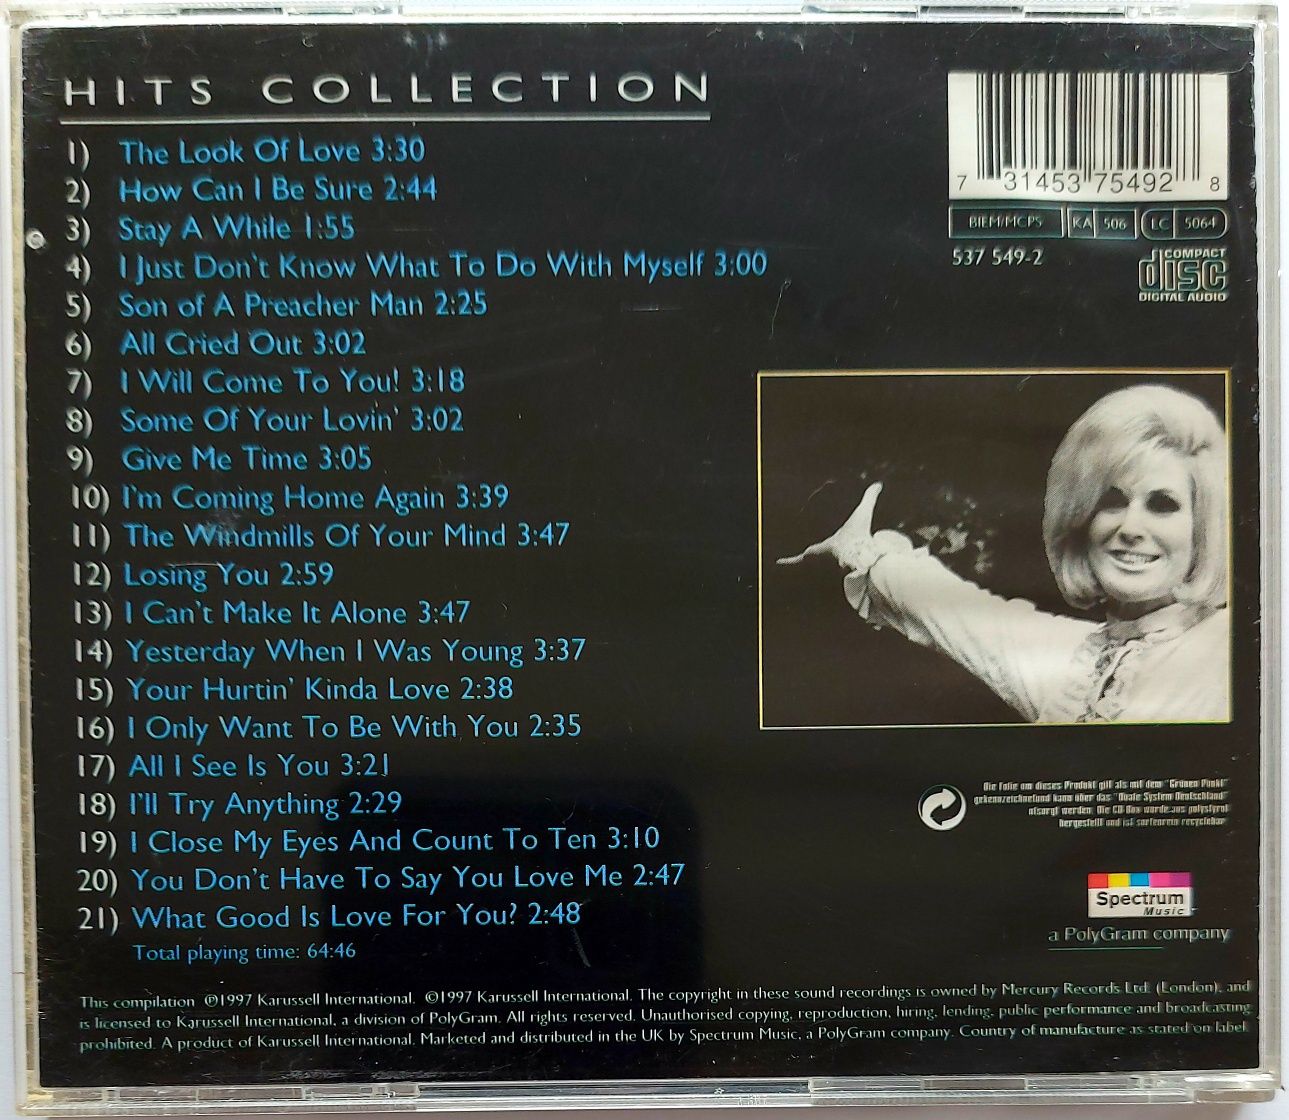 Dusty Springfield Hits Collection 1997r